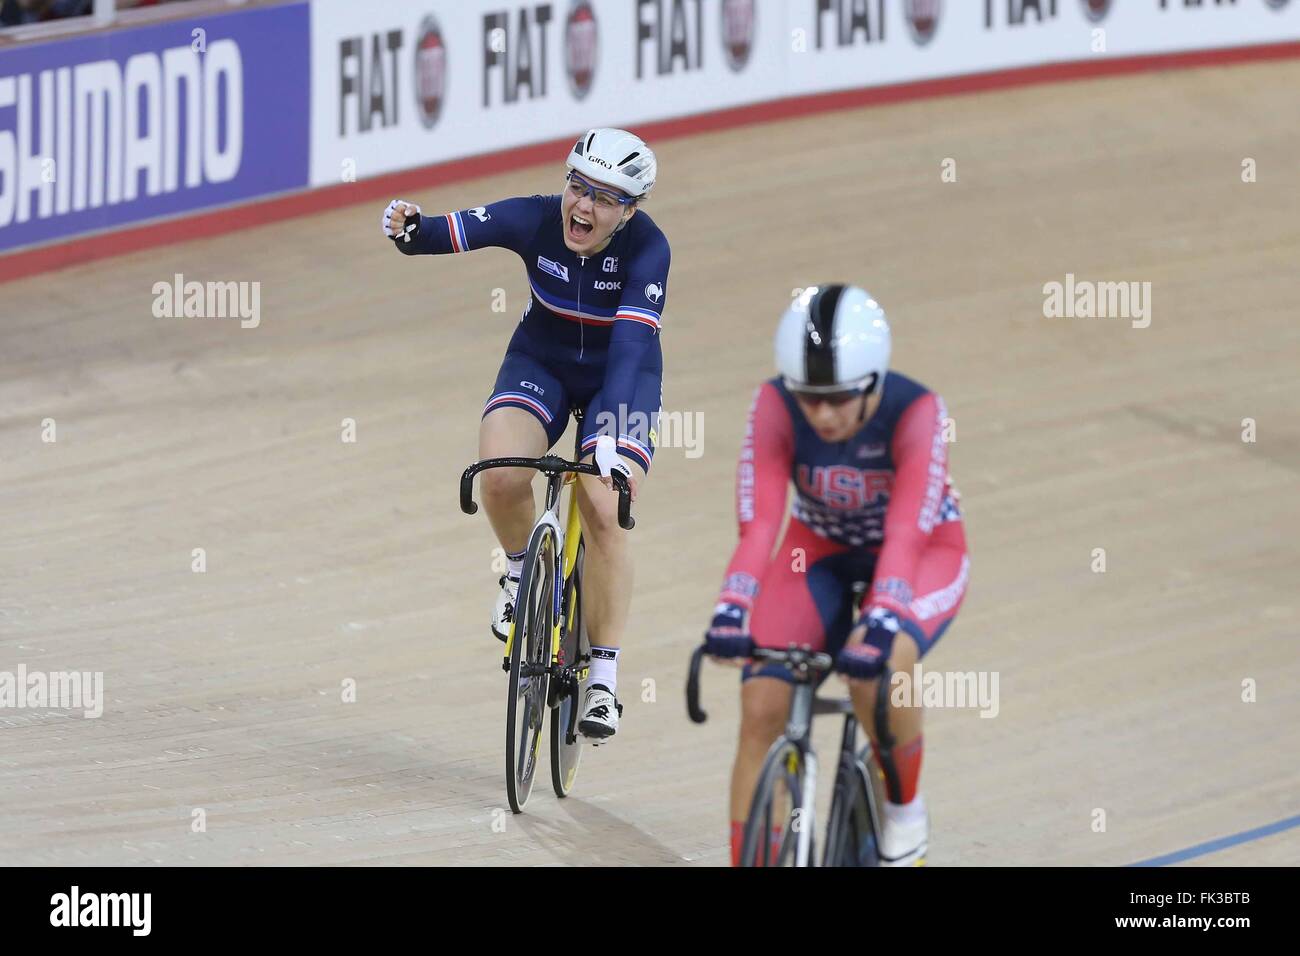 Lee Valley Velo Centre, Lonodn UK. 6. März 2016. UCI Track Cycling World Championships Womens Womens Omnium. Laurie Berthon (FRA) Frankreich silberne Medaillenträger Credit: Action Plus Sport/Alamy Live News Stockfoto